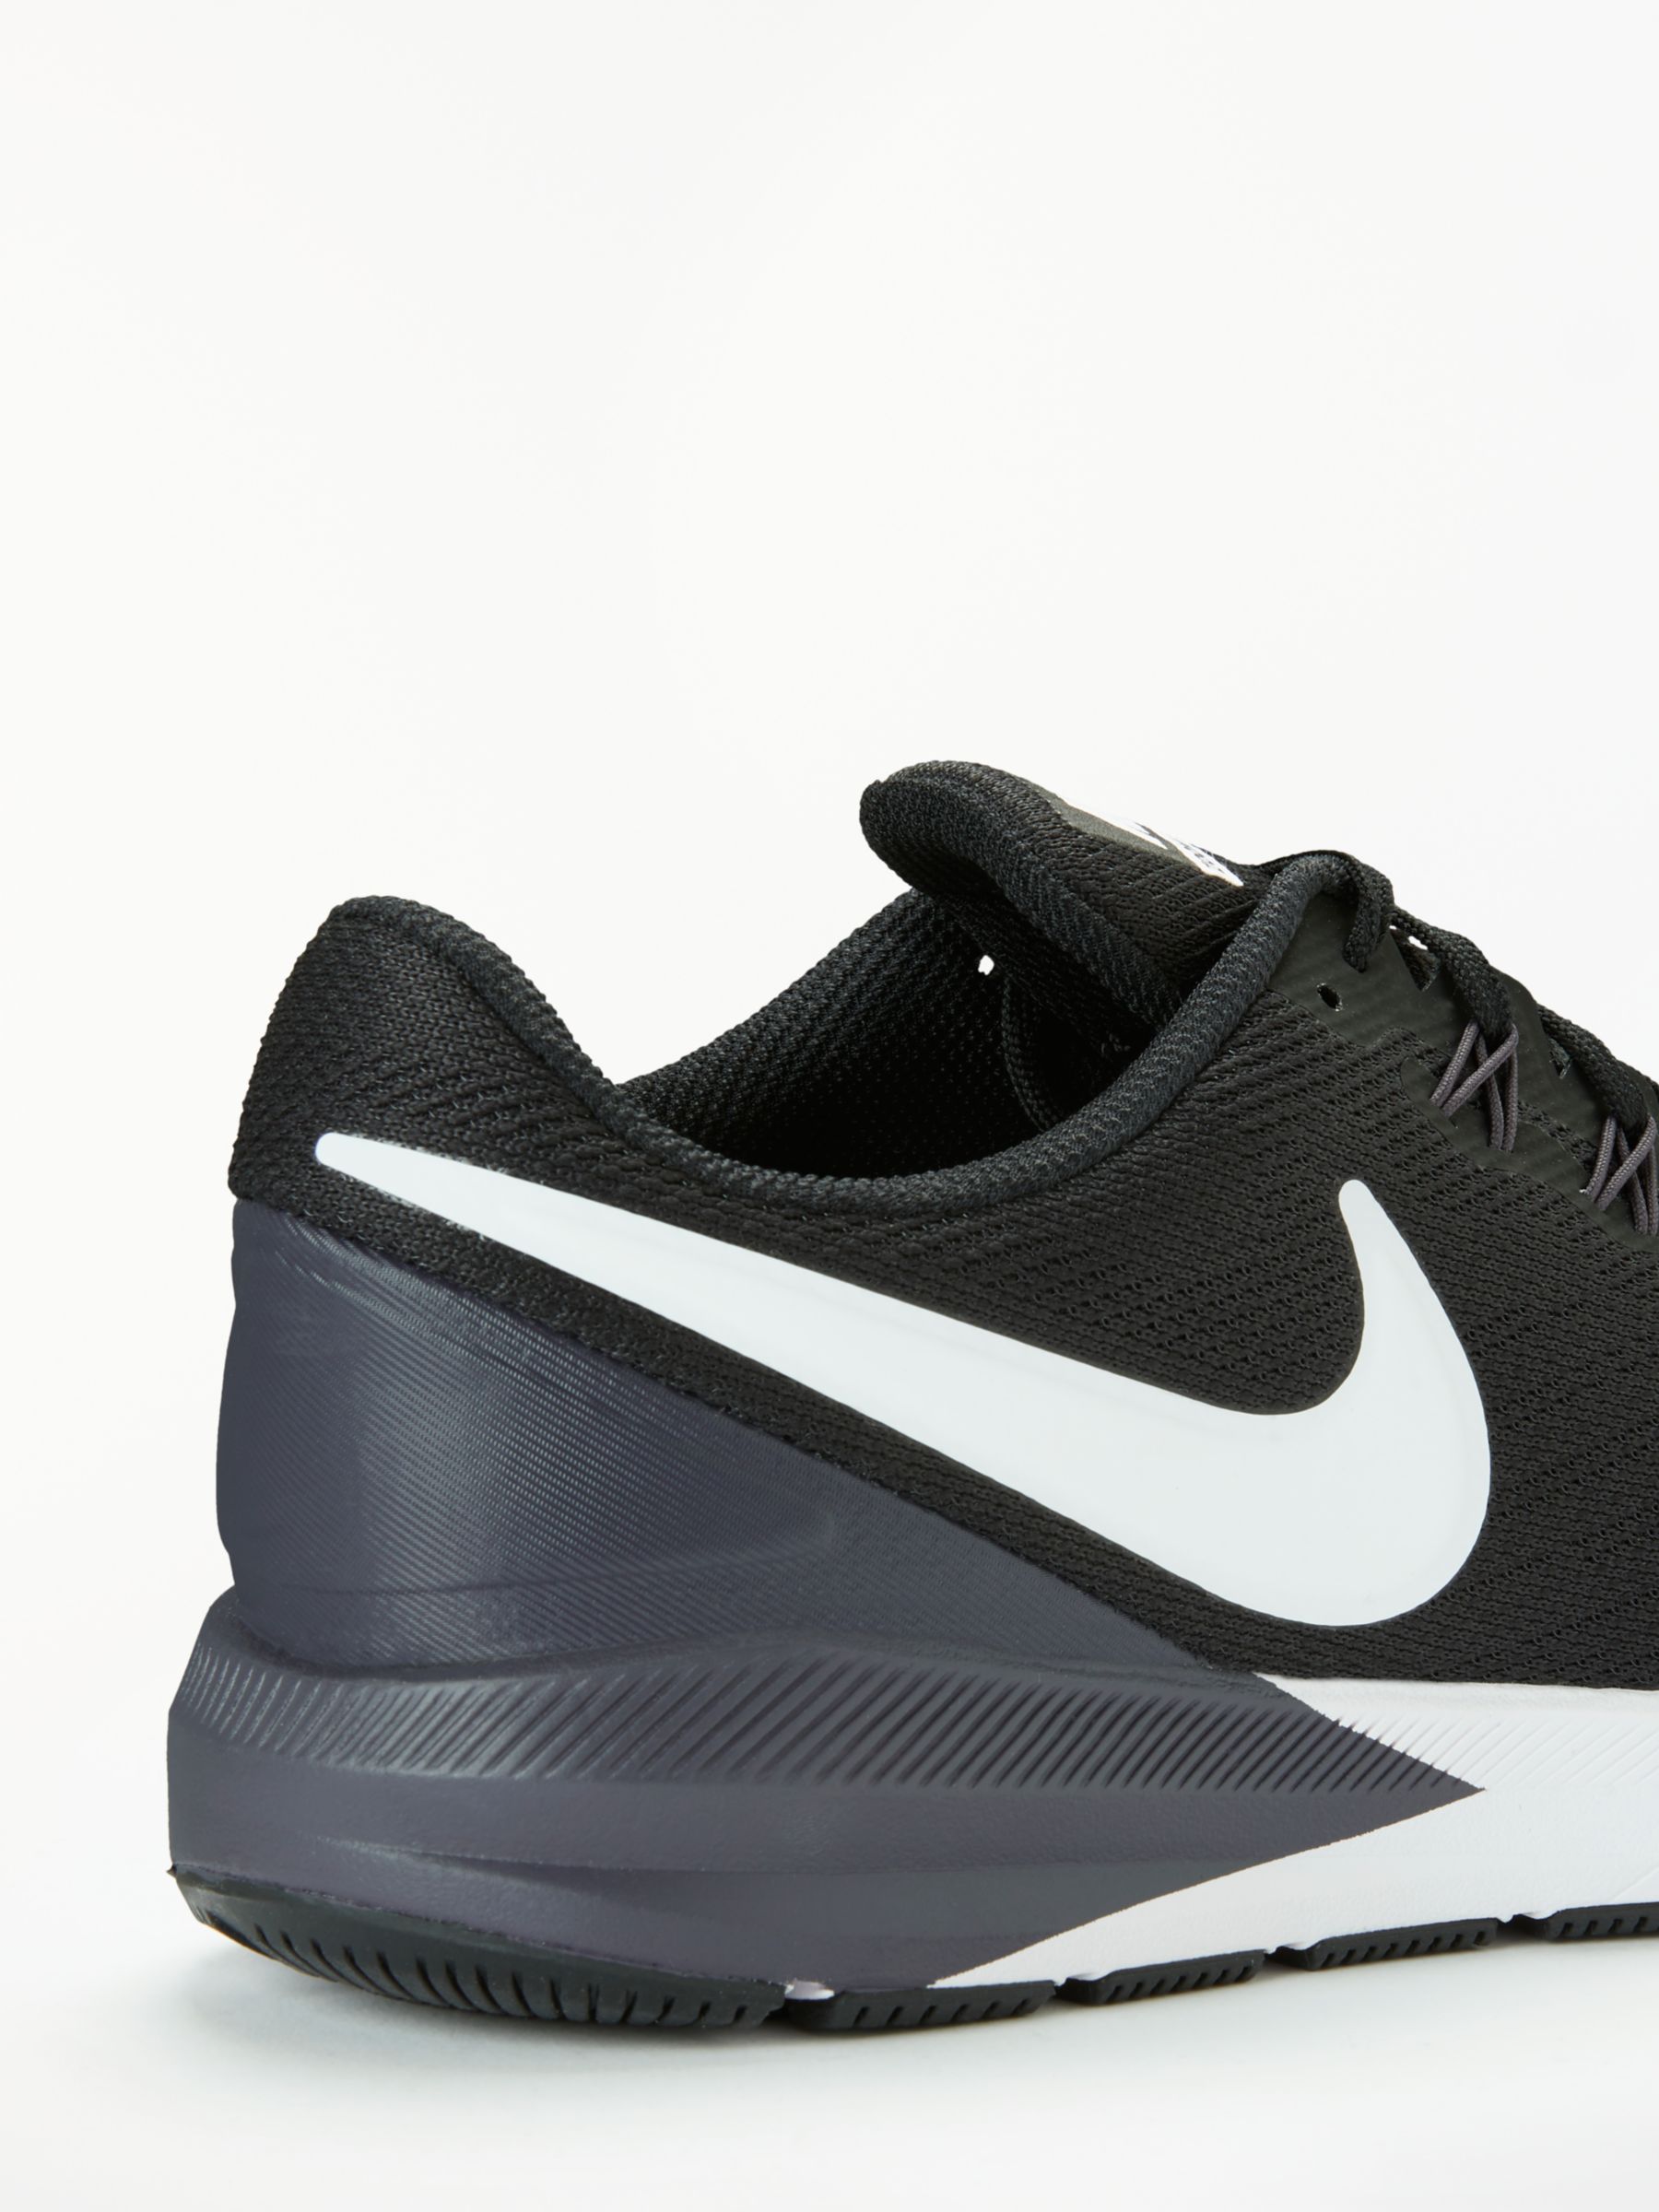 violín mano salario Nike Air Zoom Structure 22 Men's Running Shoes